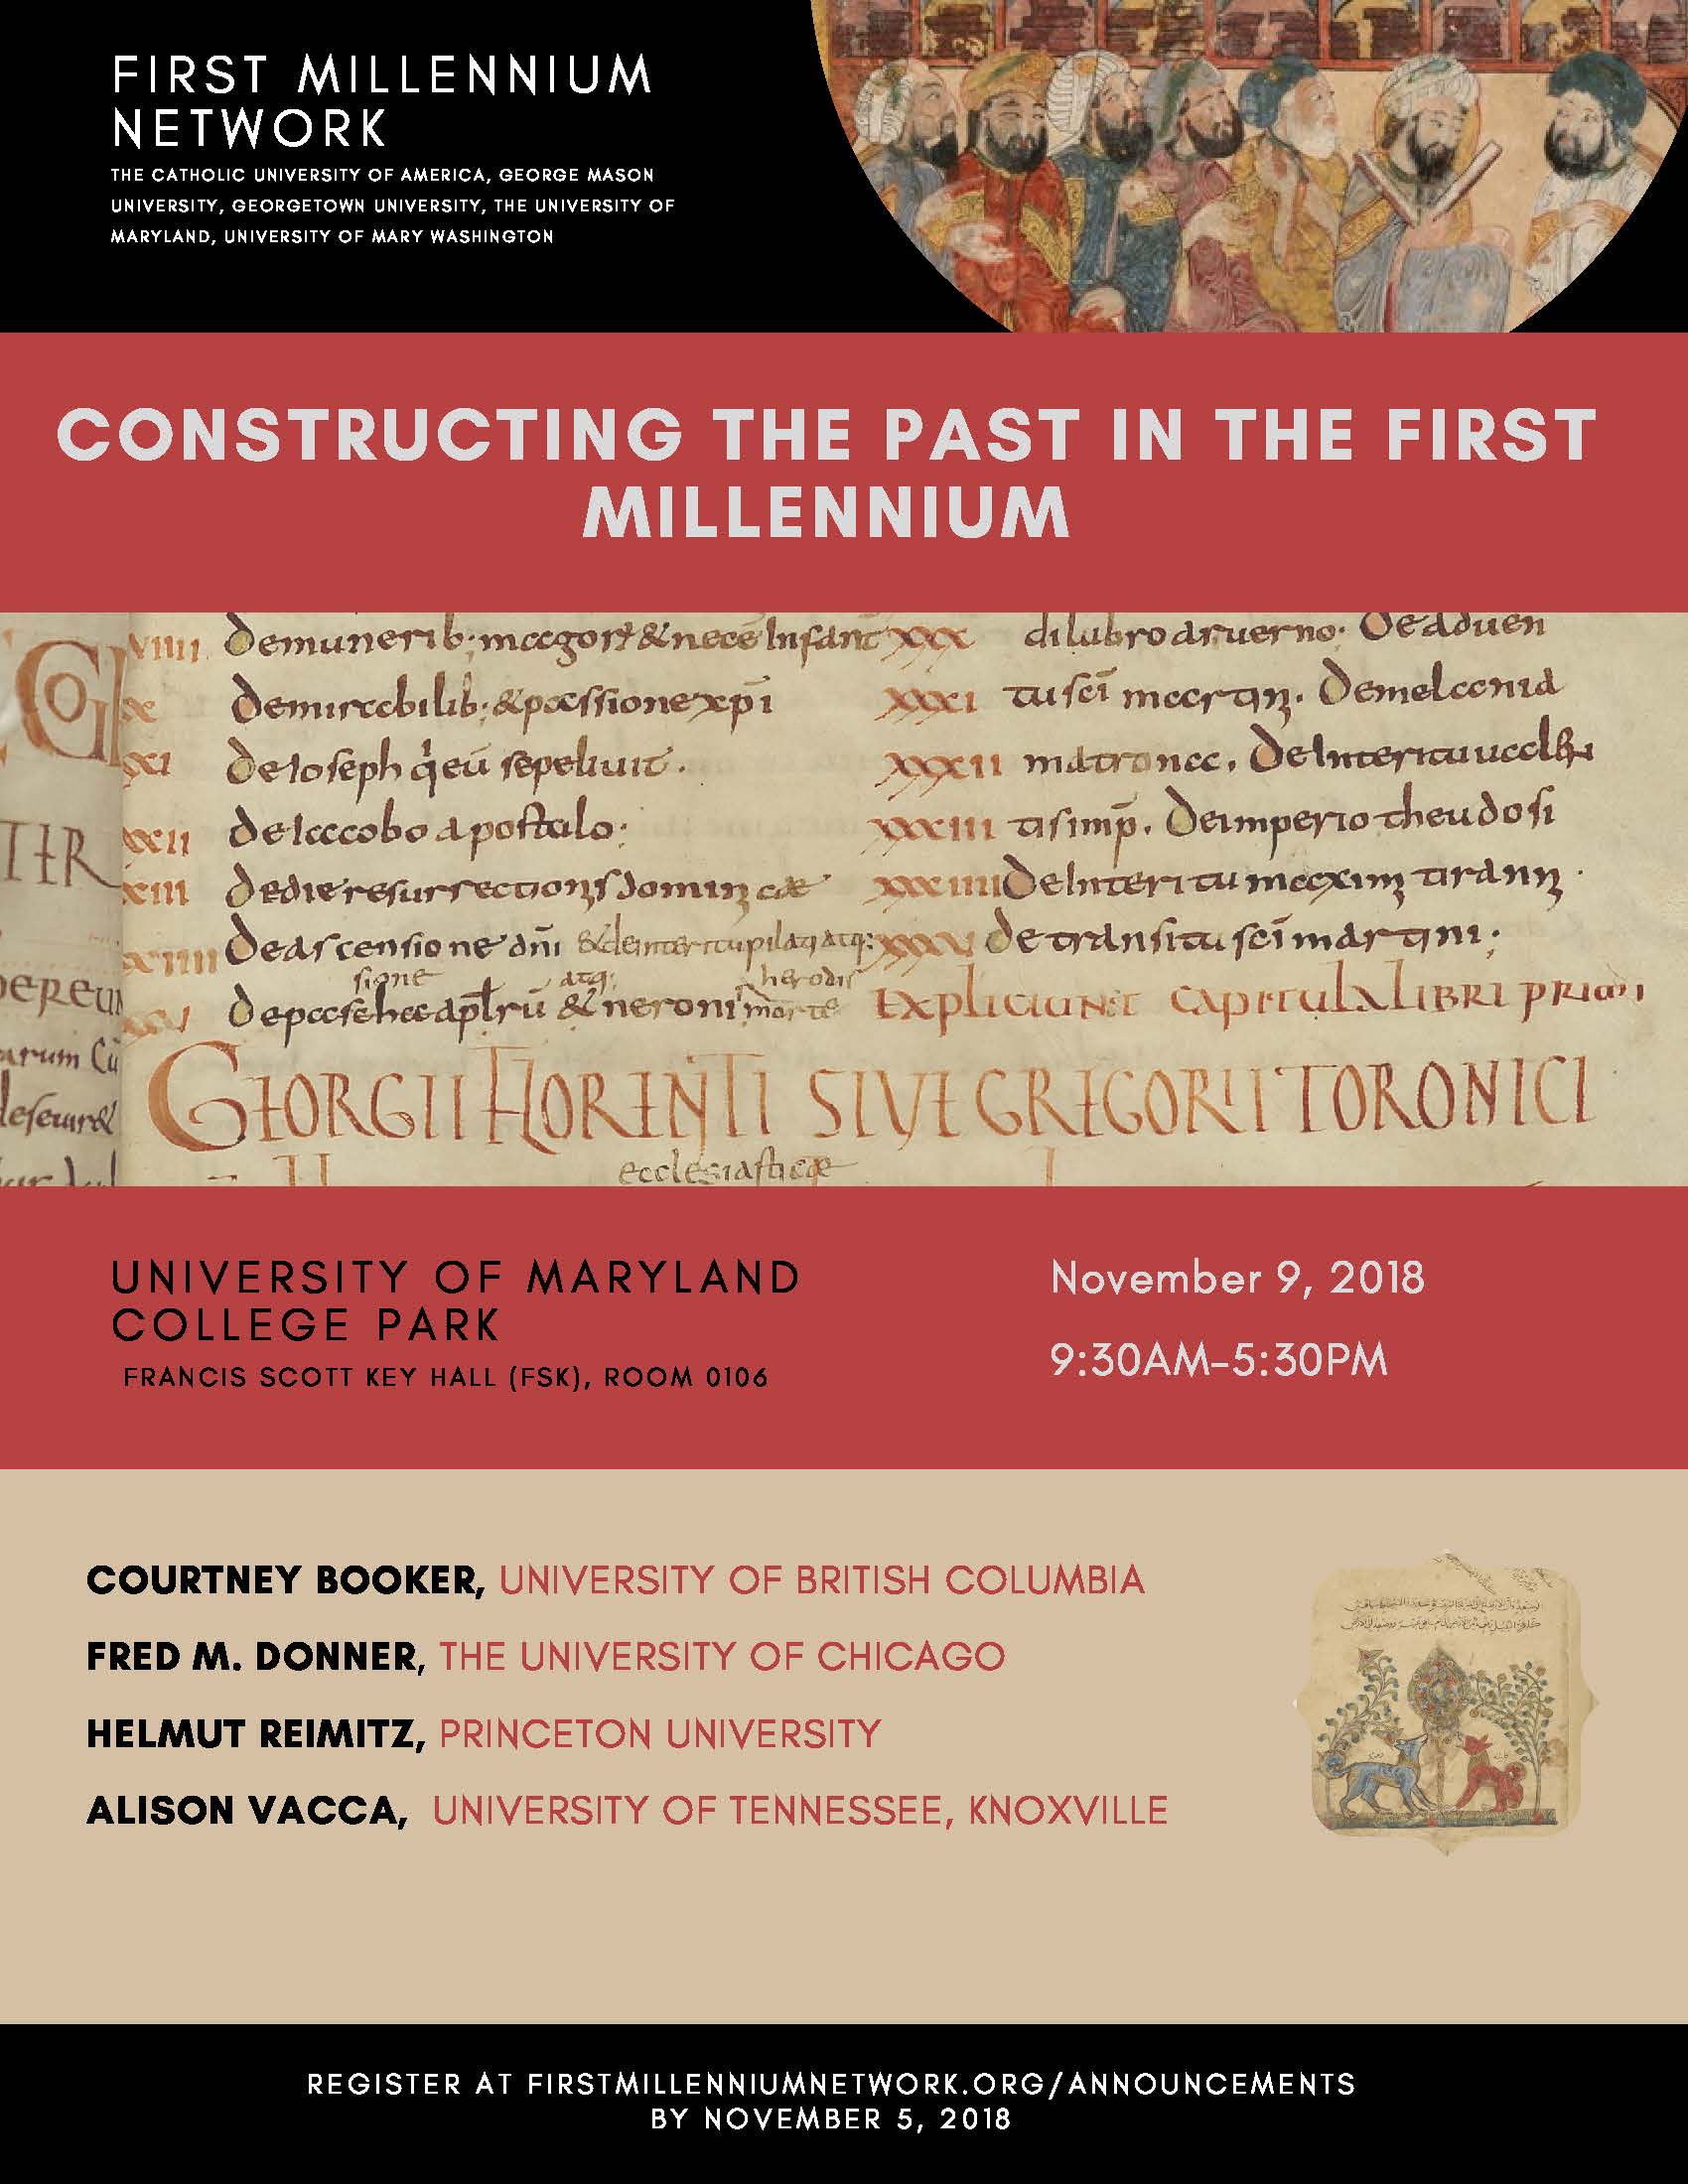 Image for event - First Millennium Network Presents: Constructing the Past in the First Millennium